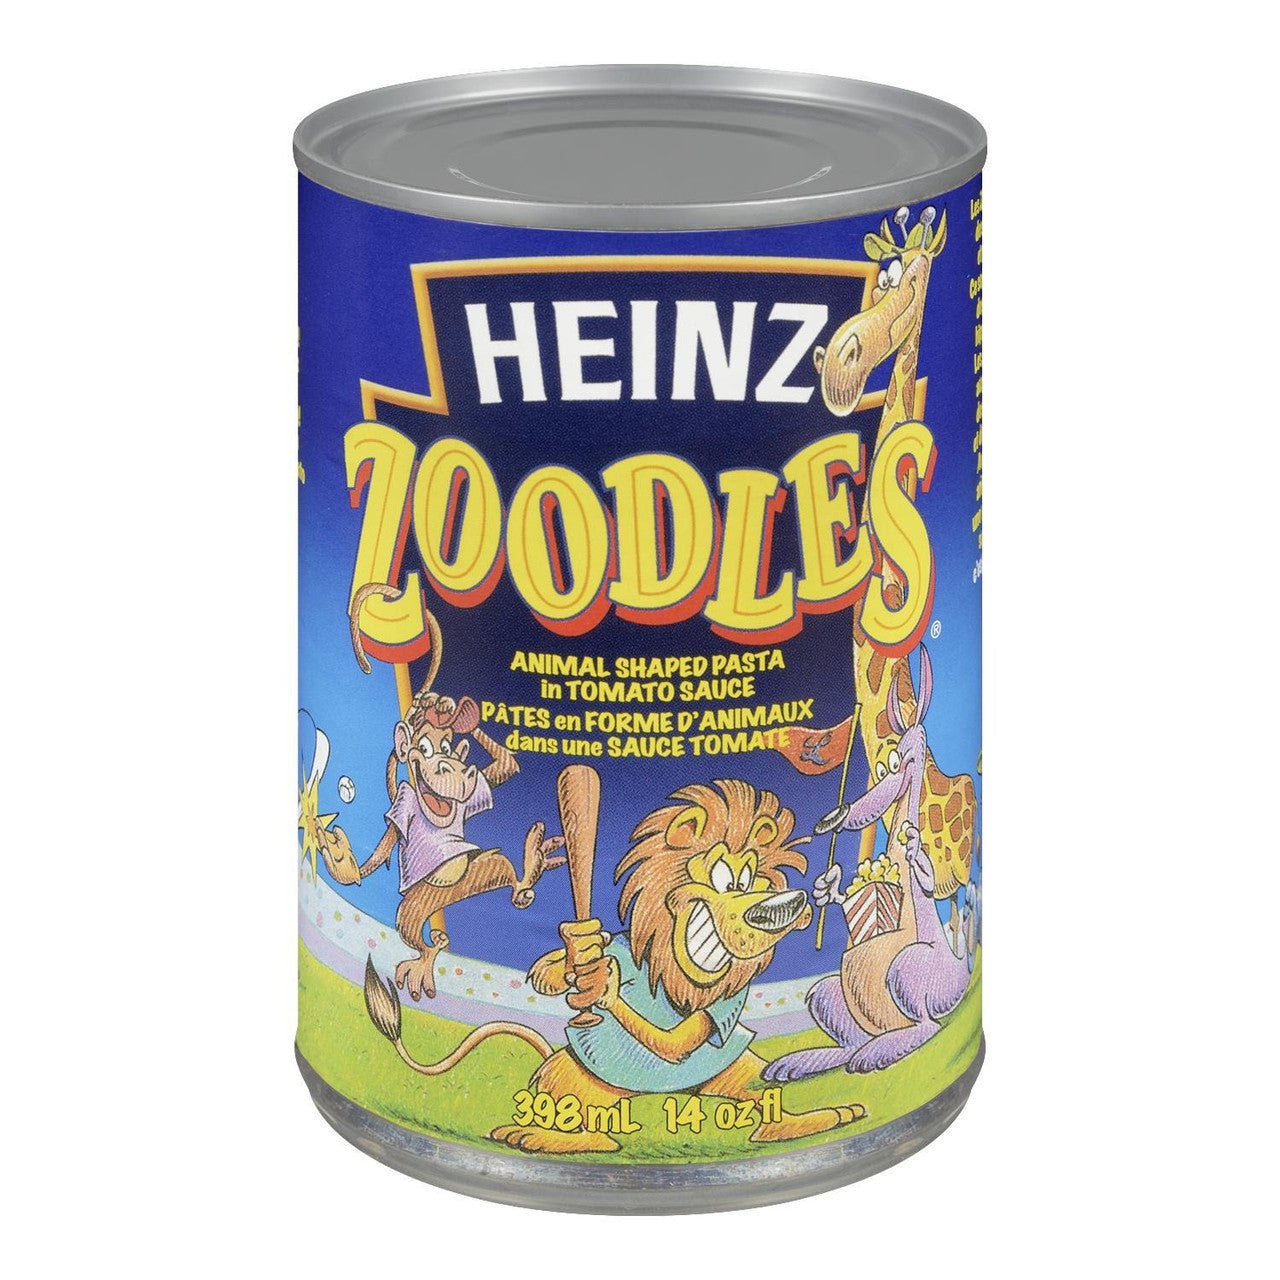 Heinz Zoodles Pasta, 398mL/13.4oz., Cans, (Pack of 24) {Imported from Canada}